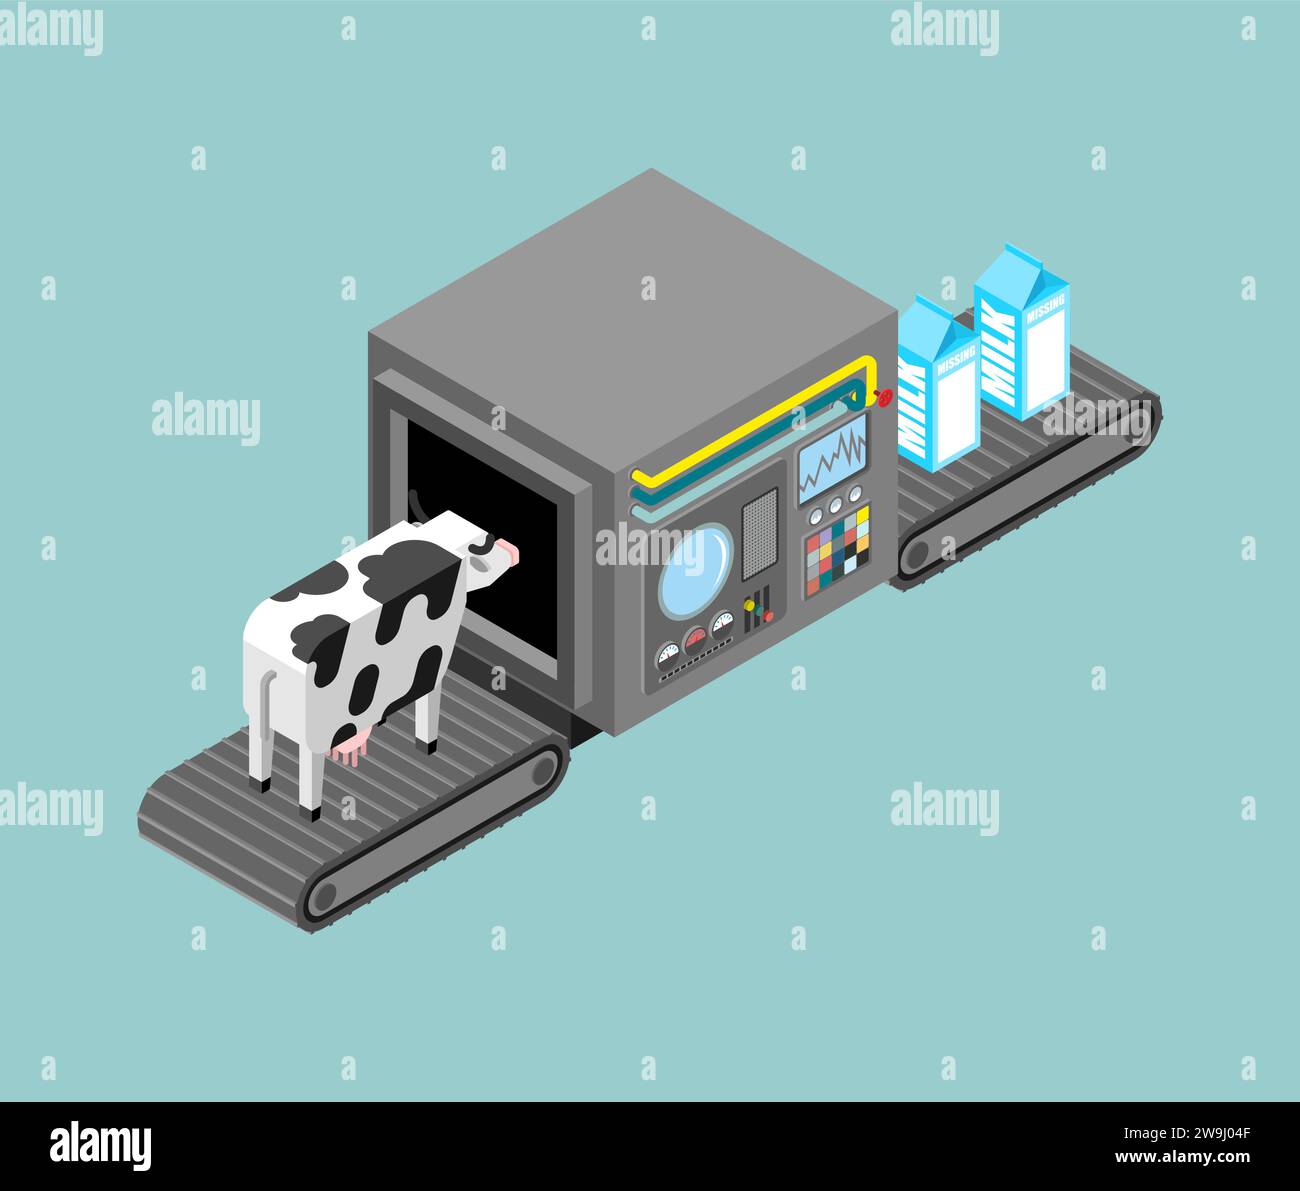 Automatic milk production. Cow and milk Production complex of technological equipment. Engineering vehicle isometric. Food production equipment. Stock Vector